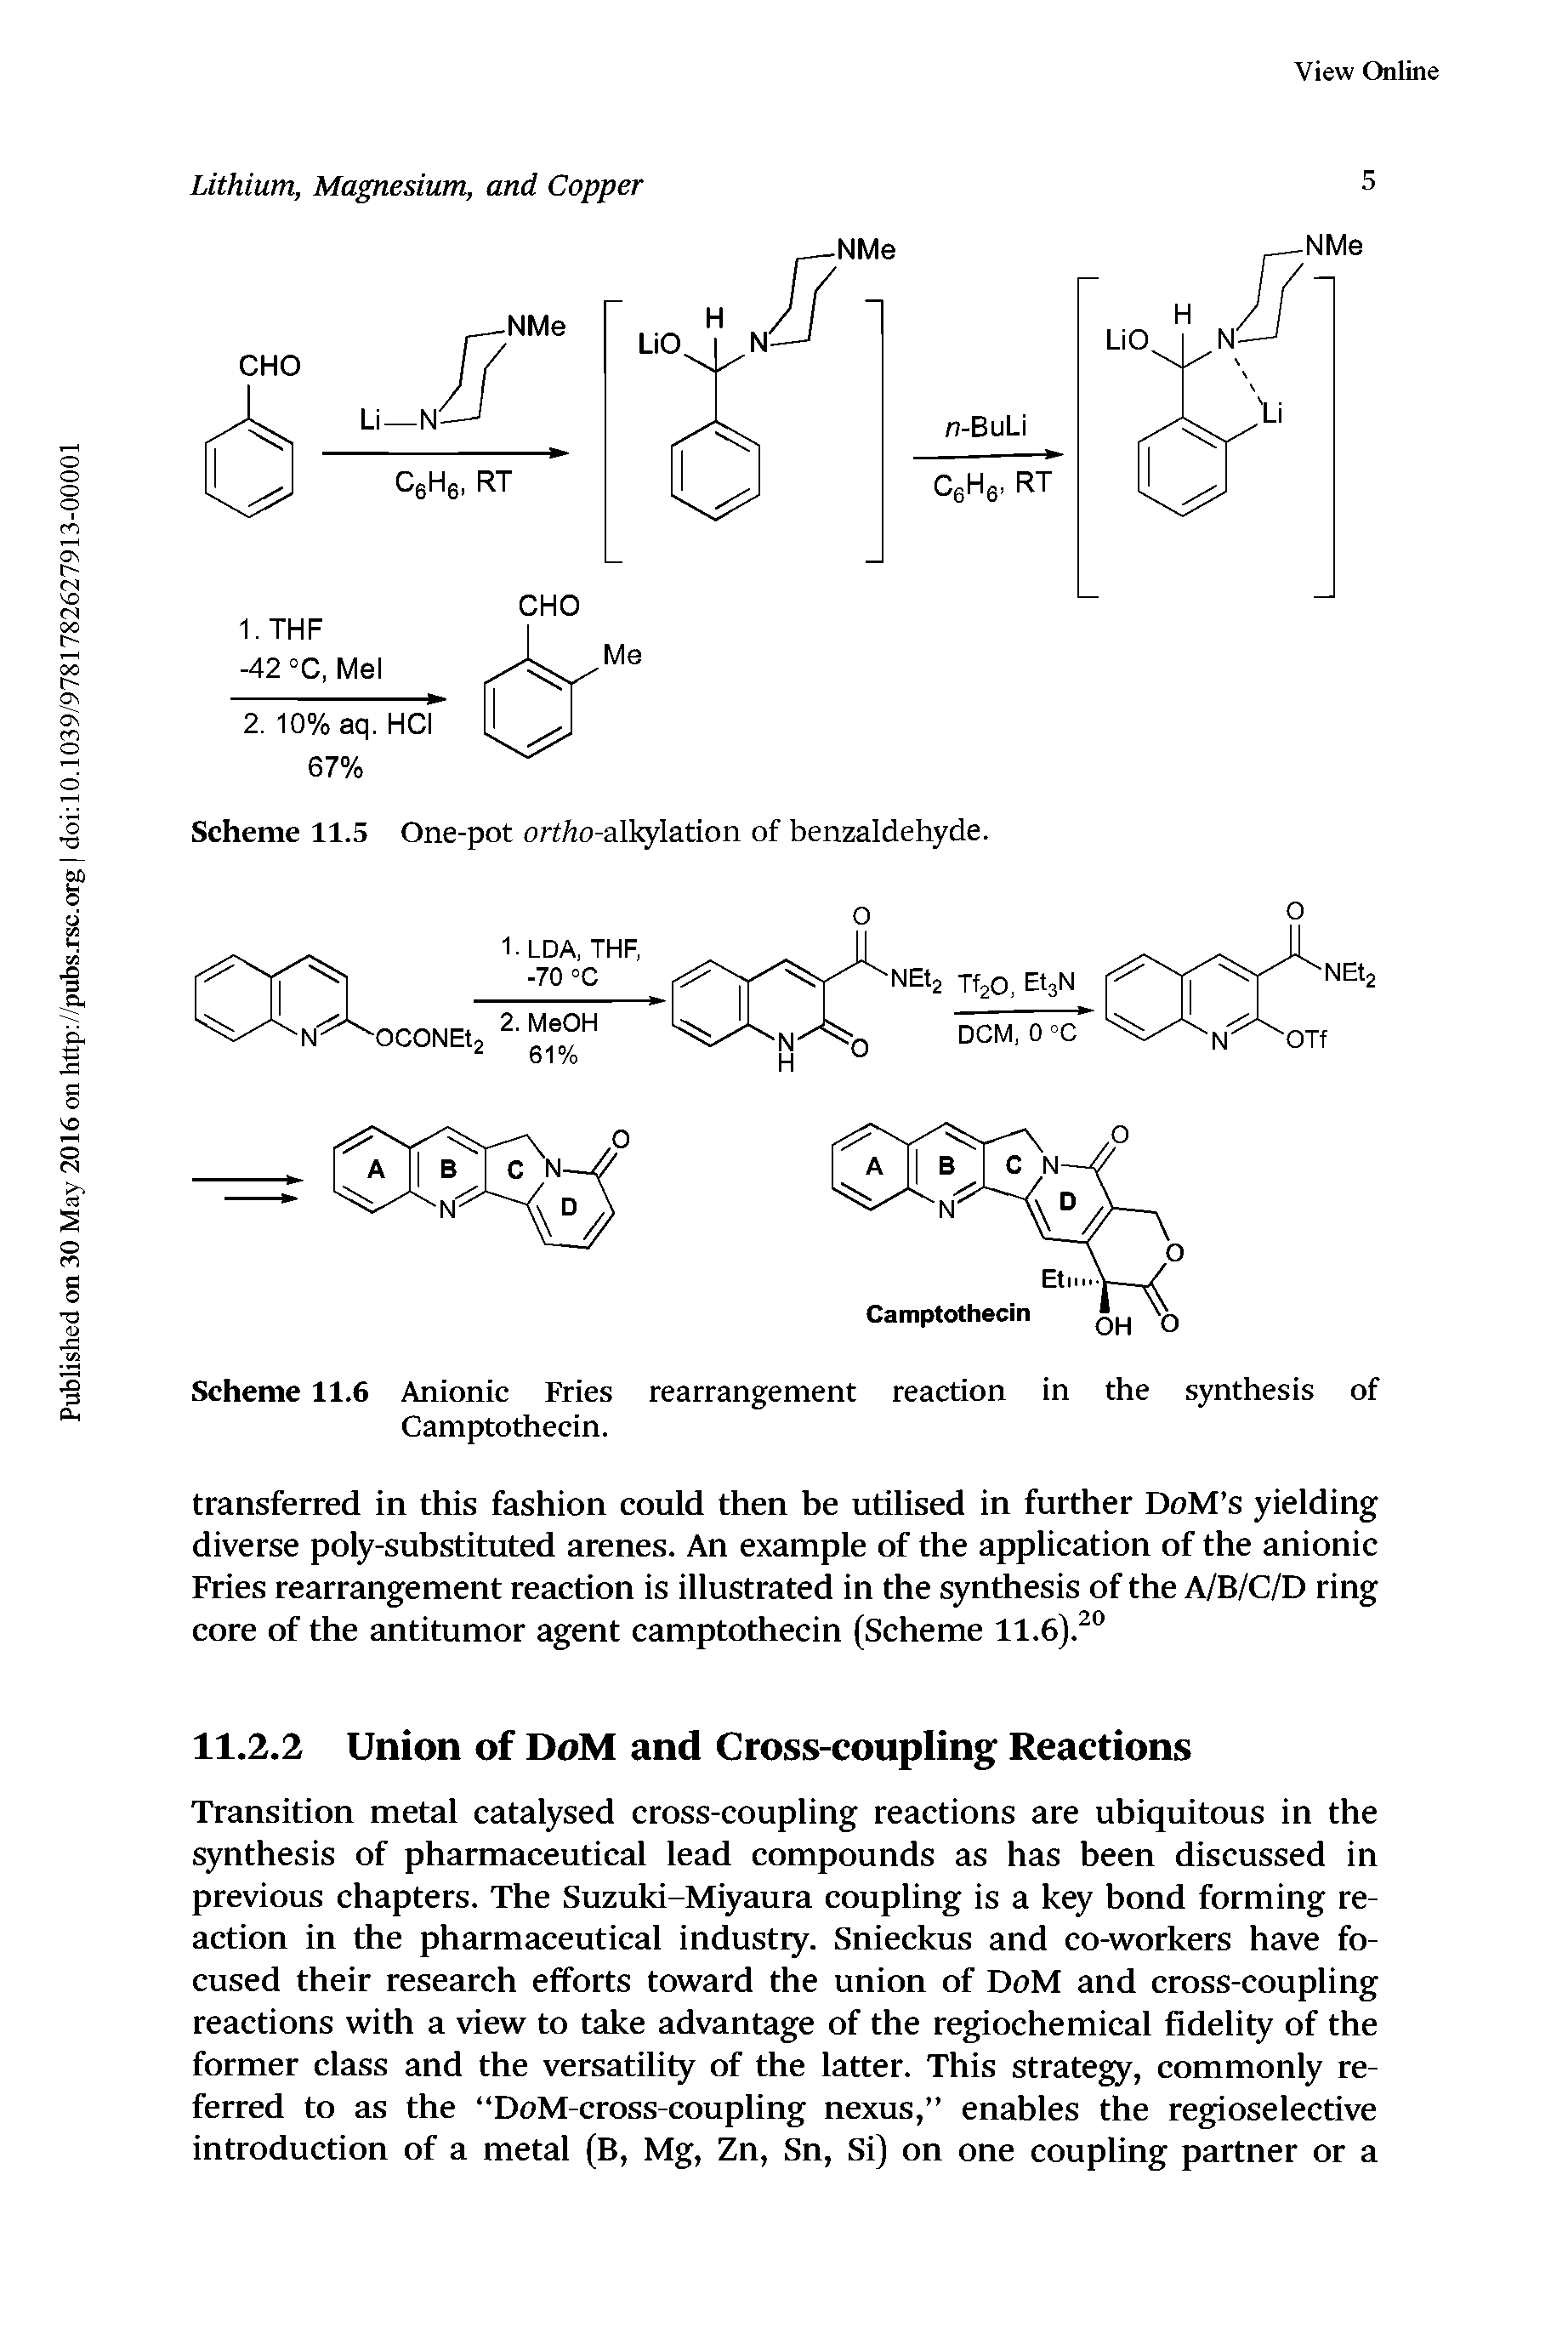 Scheme 11.6 Anionic Fries rearrangement reaction in the synthesis of Camptothecin.